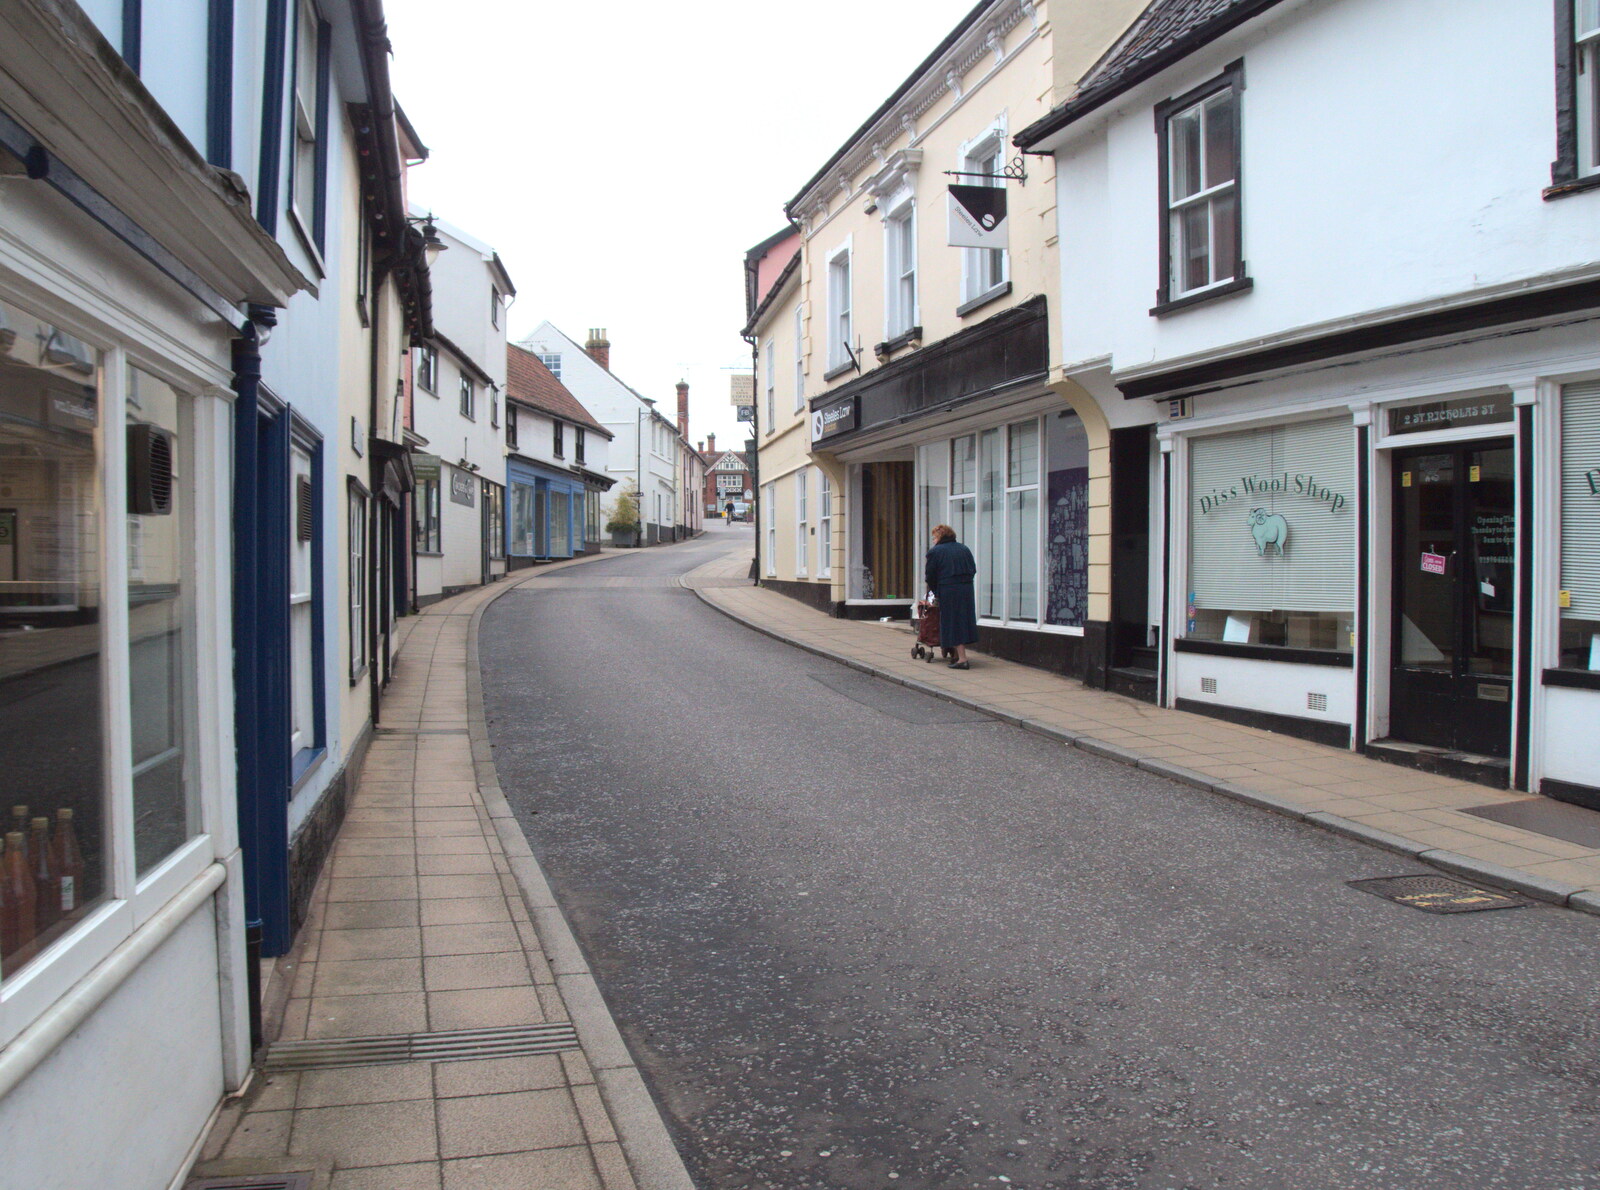 St. Nicholas Street is devoid of cars from The Lockdown Desertion of Diss, and a Bike Ride up the Avenue, Brome - 19th April 2020